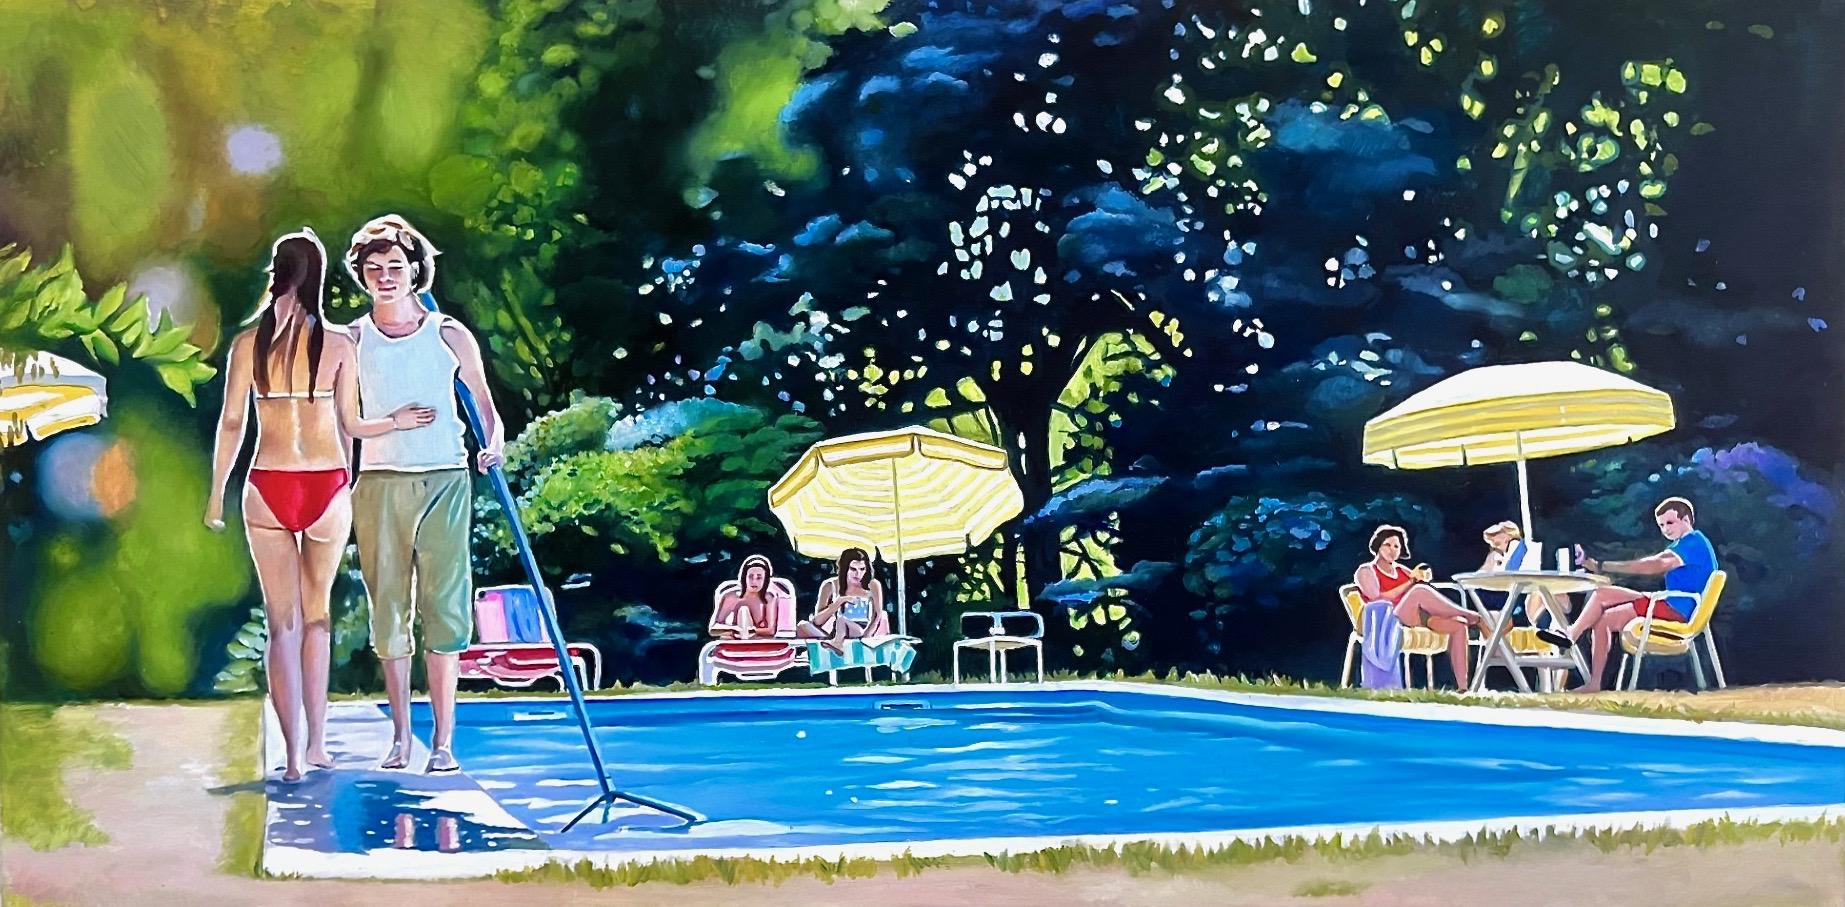 "Pool Party" Original Oil Painting 12"x24"